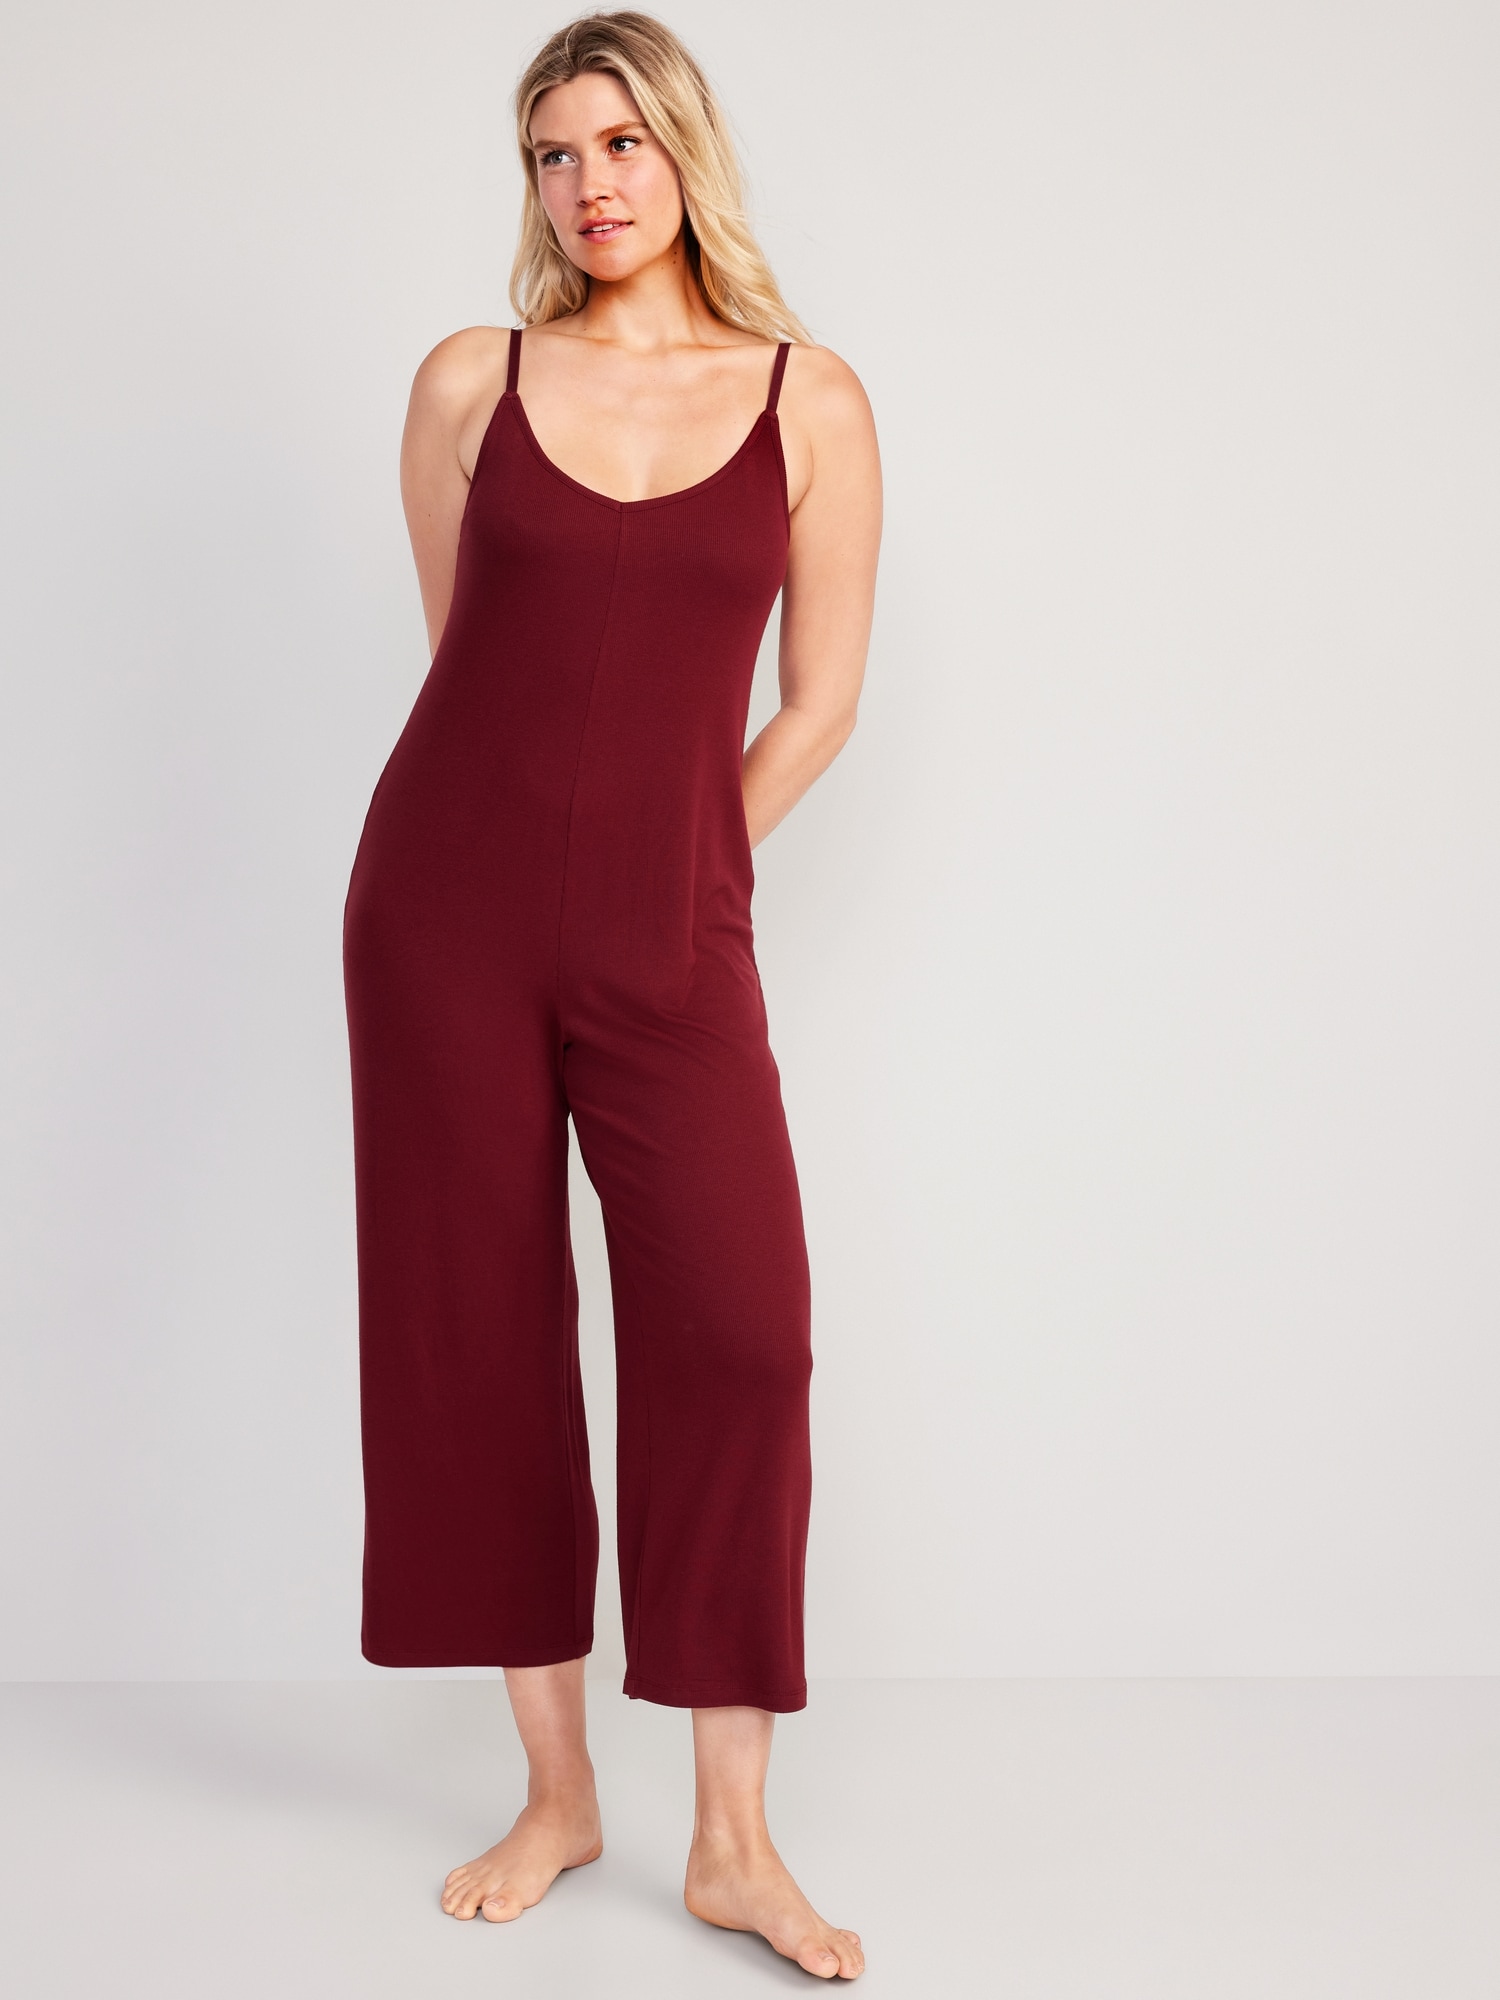  OYOANGLE Women's Maternity Ribbed Knit Cami Jumpsuit